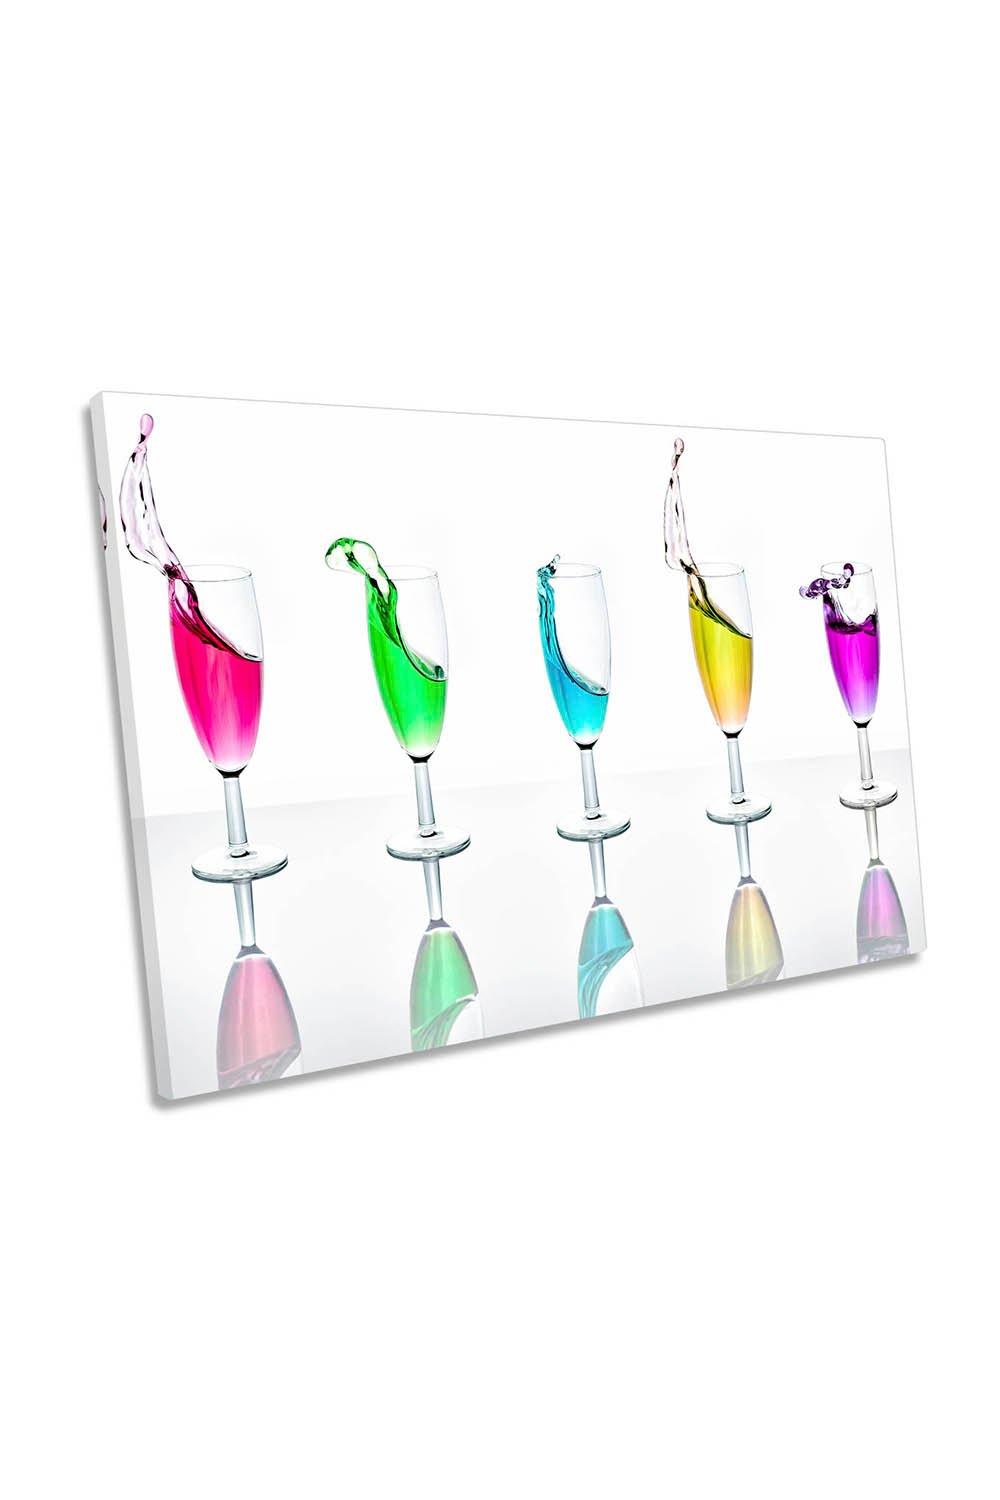 Splashes Cocktail Wine Glasses Kitchen Canvas Wall Art Picture Print